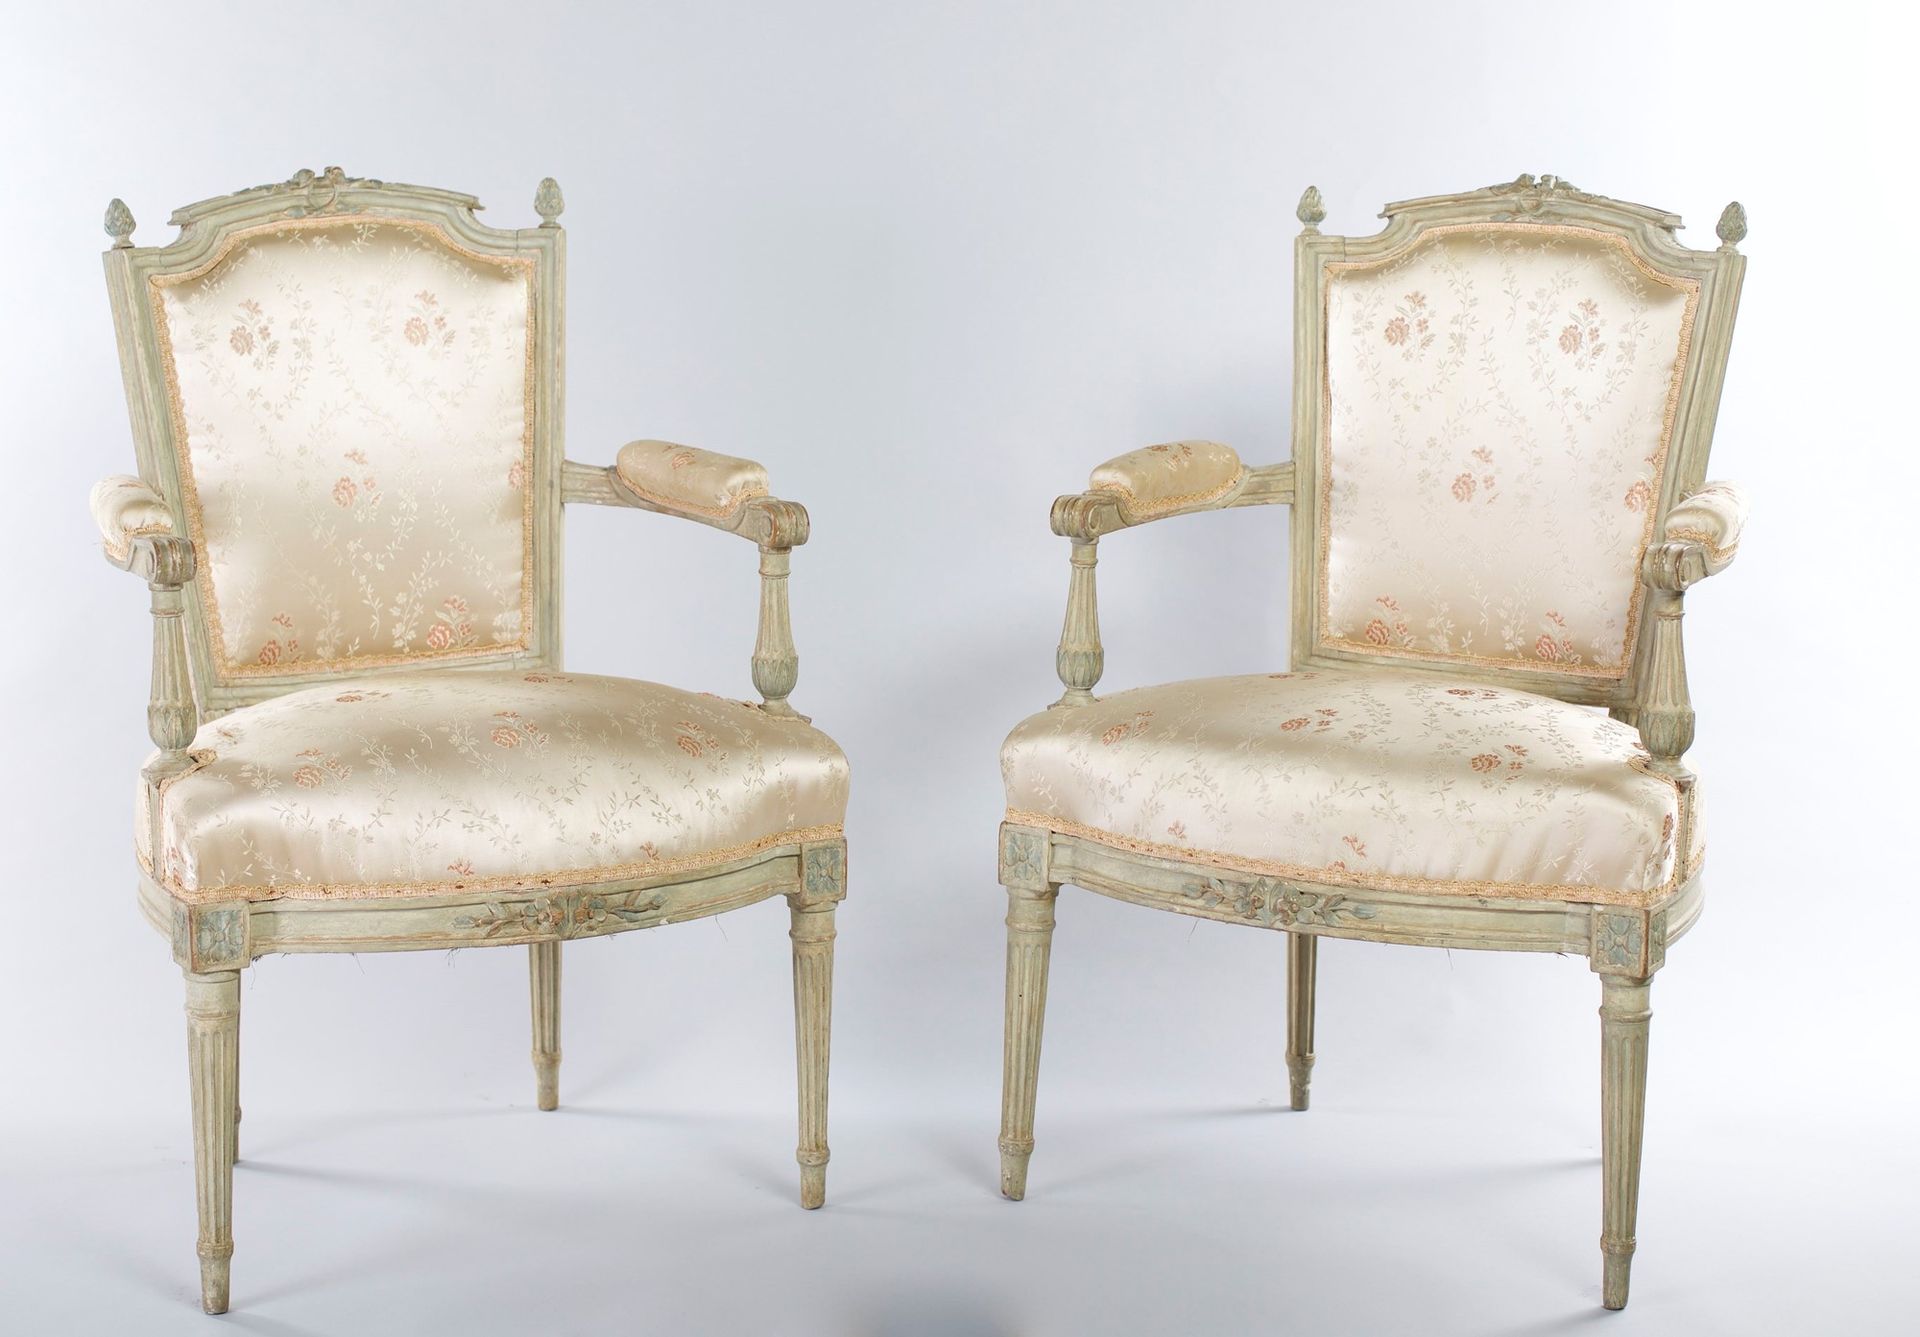 Pair of armchairs in green lacquered wood, 19th century 框架中间有花纹浮雕；有软垫的靠背、座椅和扶手的中&hellip;